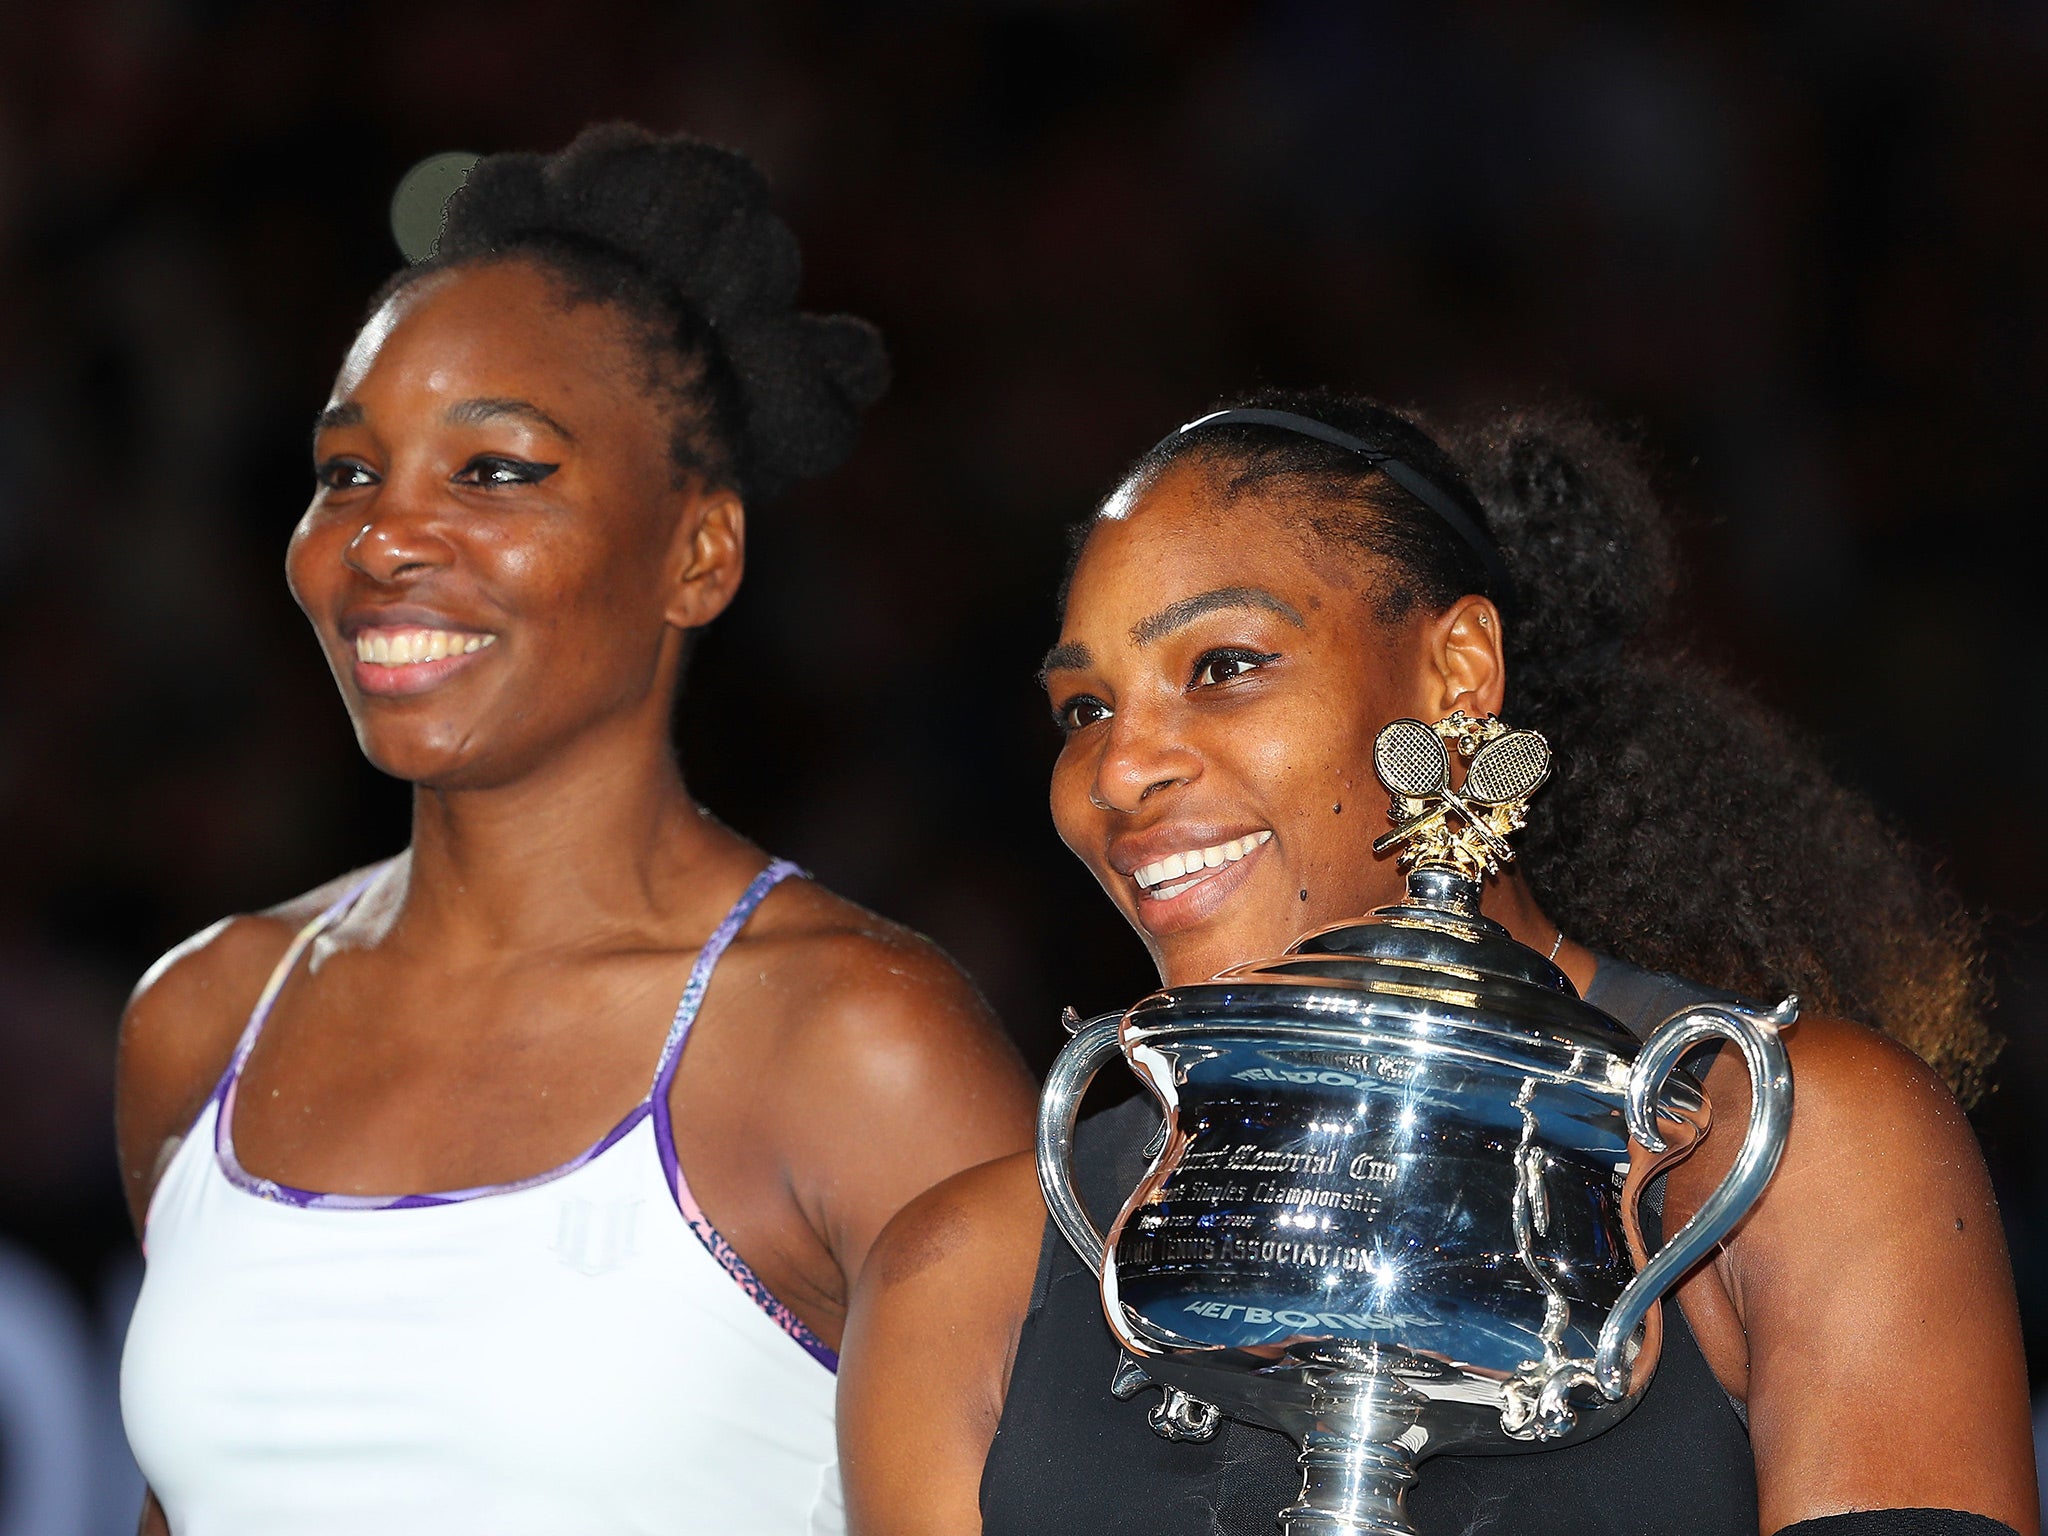 The resurgence of Venus Williams and consistency of Serena suggest they may yet share a final again